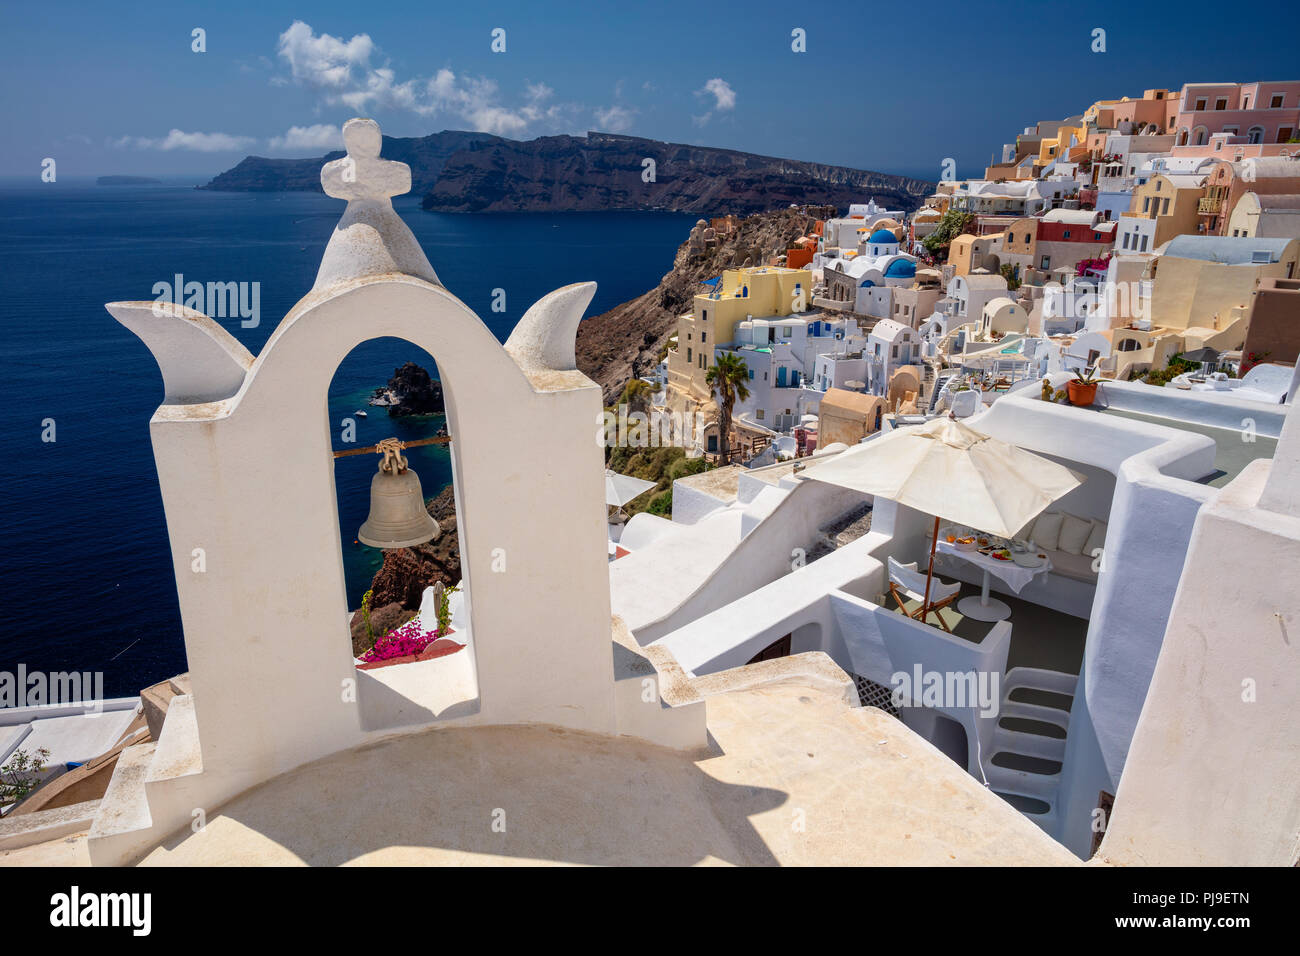 Image of famous cyclades village Oia located at the island of Santorini, South Aegean, Greece. Stock Photo